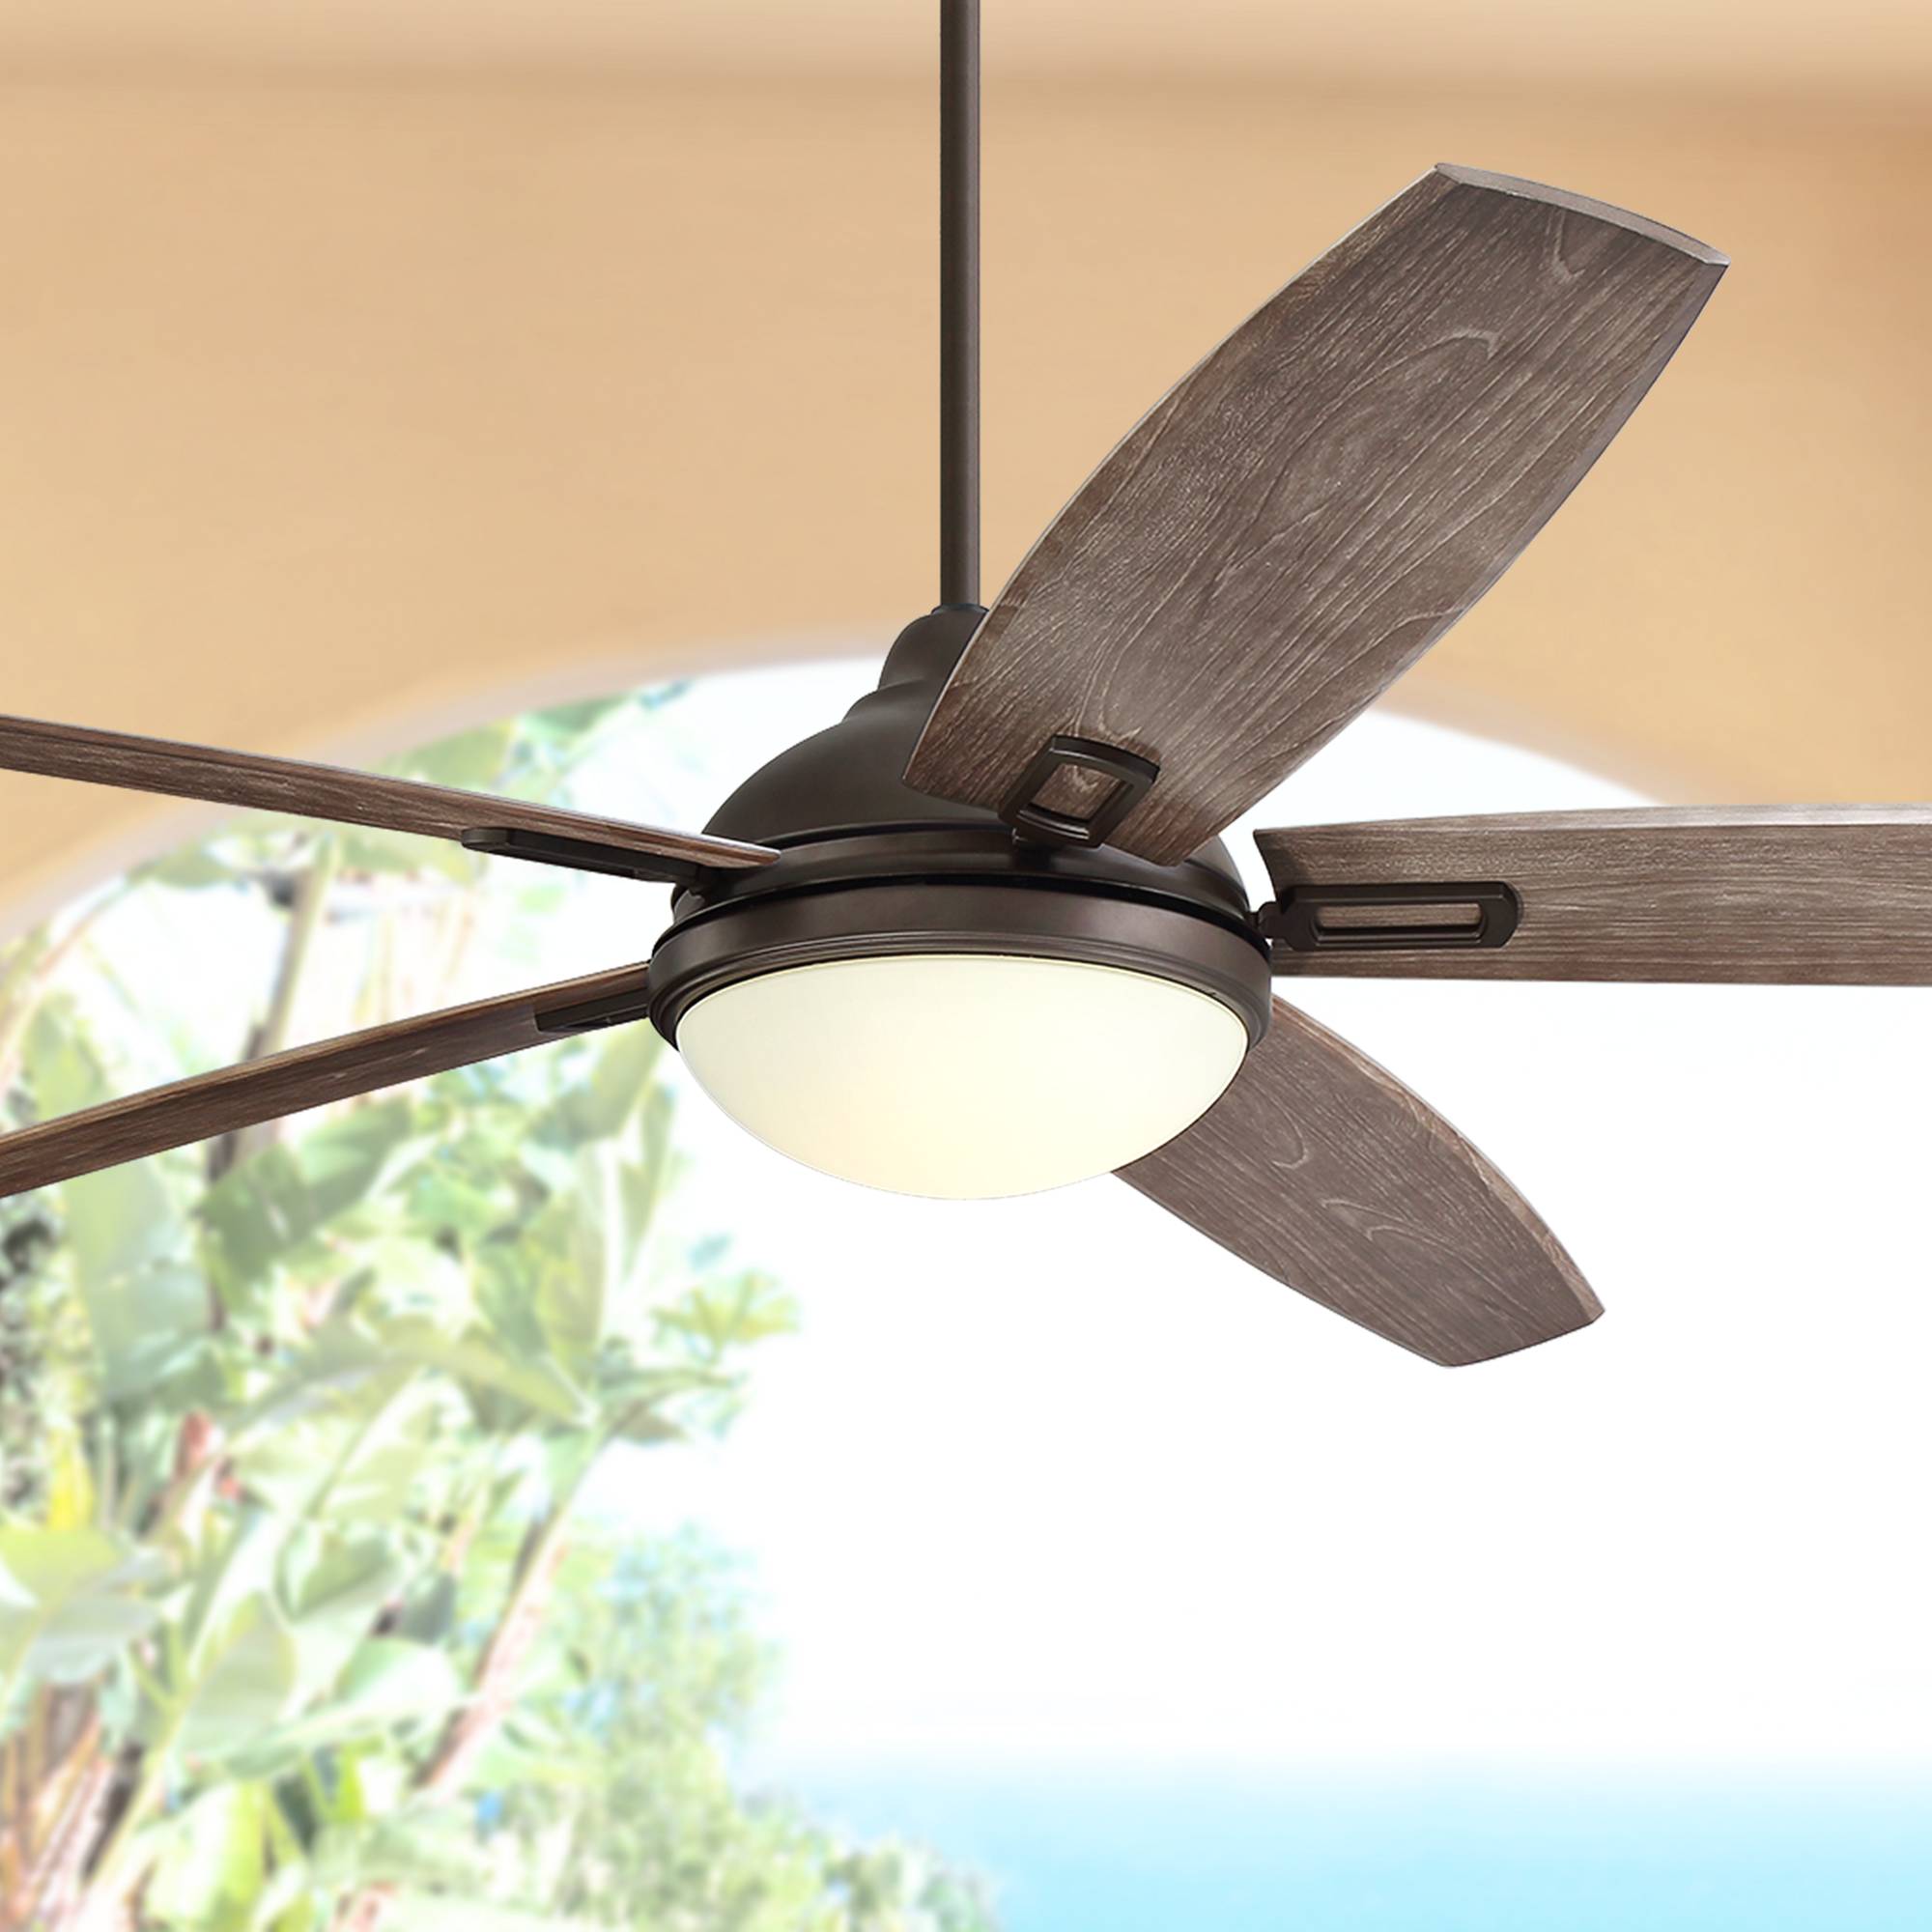 Details About 72 Rustic Outdoor Ceiling Fan With Light Led Bronze Wet Rated For Patio Porch